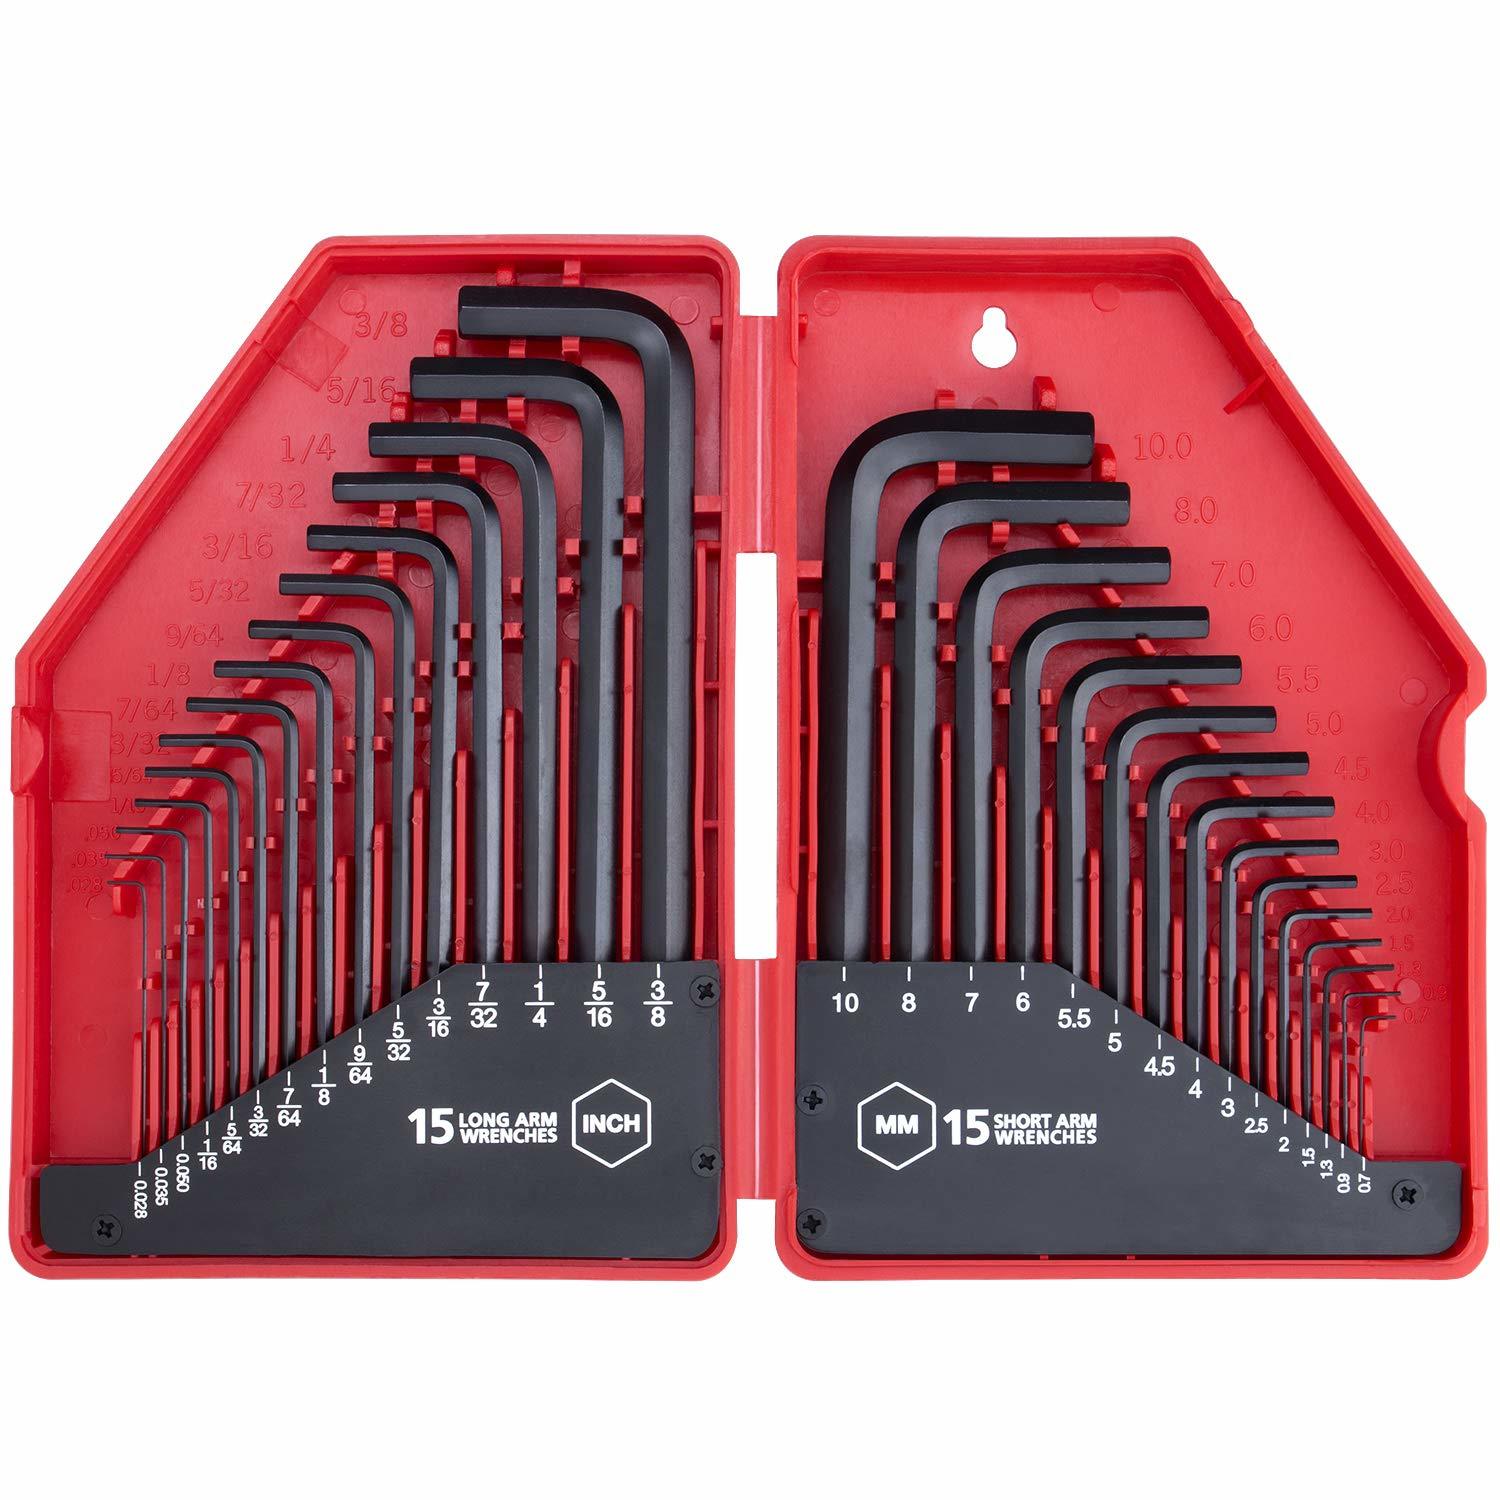 Primary image for 30-Piece Premium Hex Key Allen Wrench Set, Sae And Metric Assortment, L Shape, C